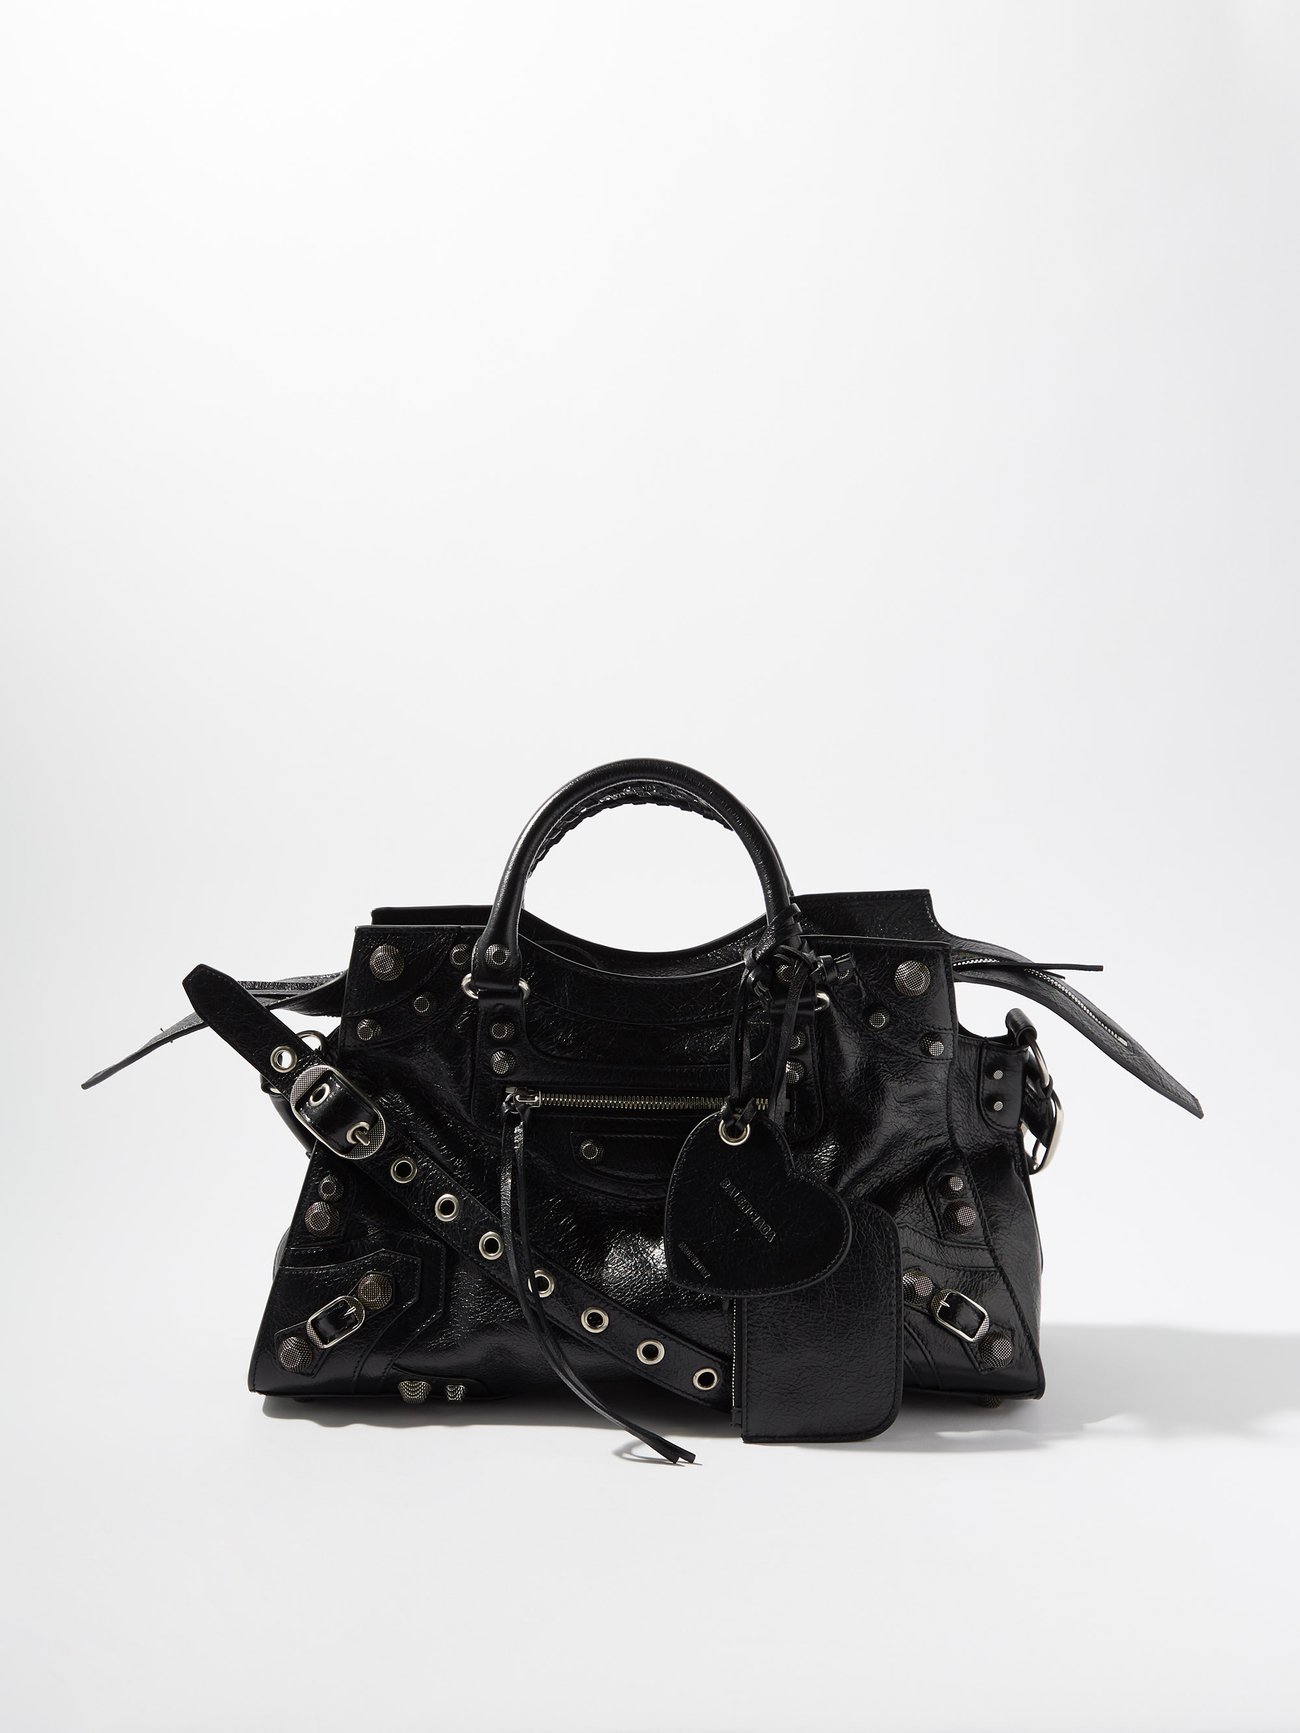 Balenciaga's Bag, Reviewed: Is It Worth the | Who What Wear